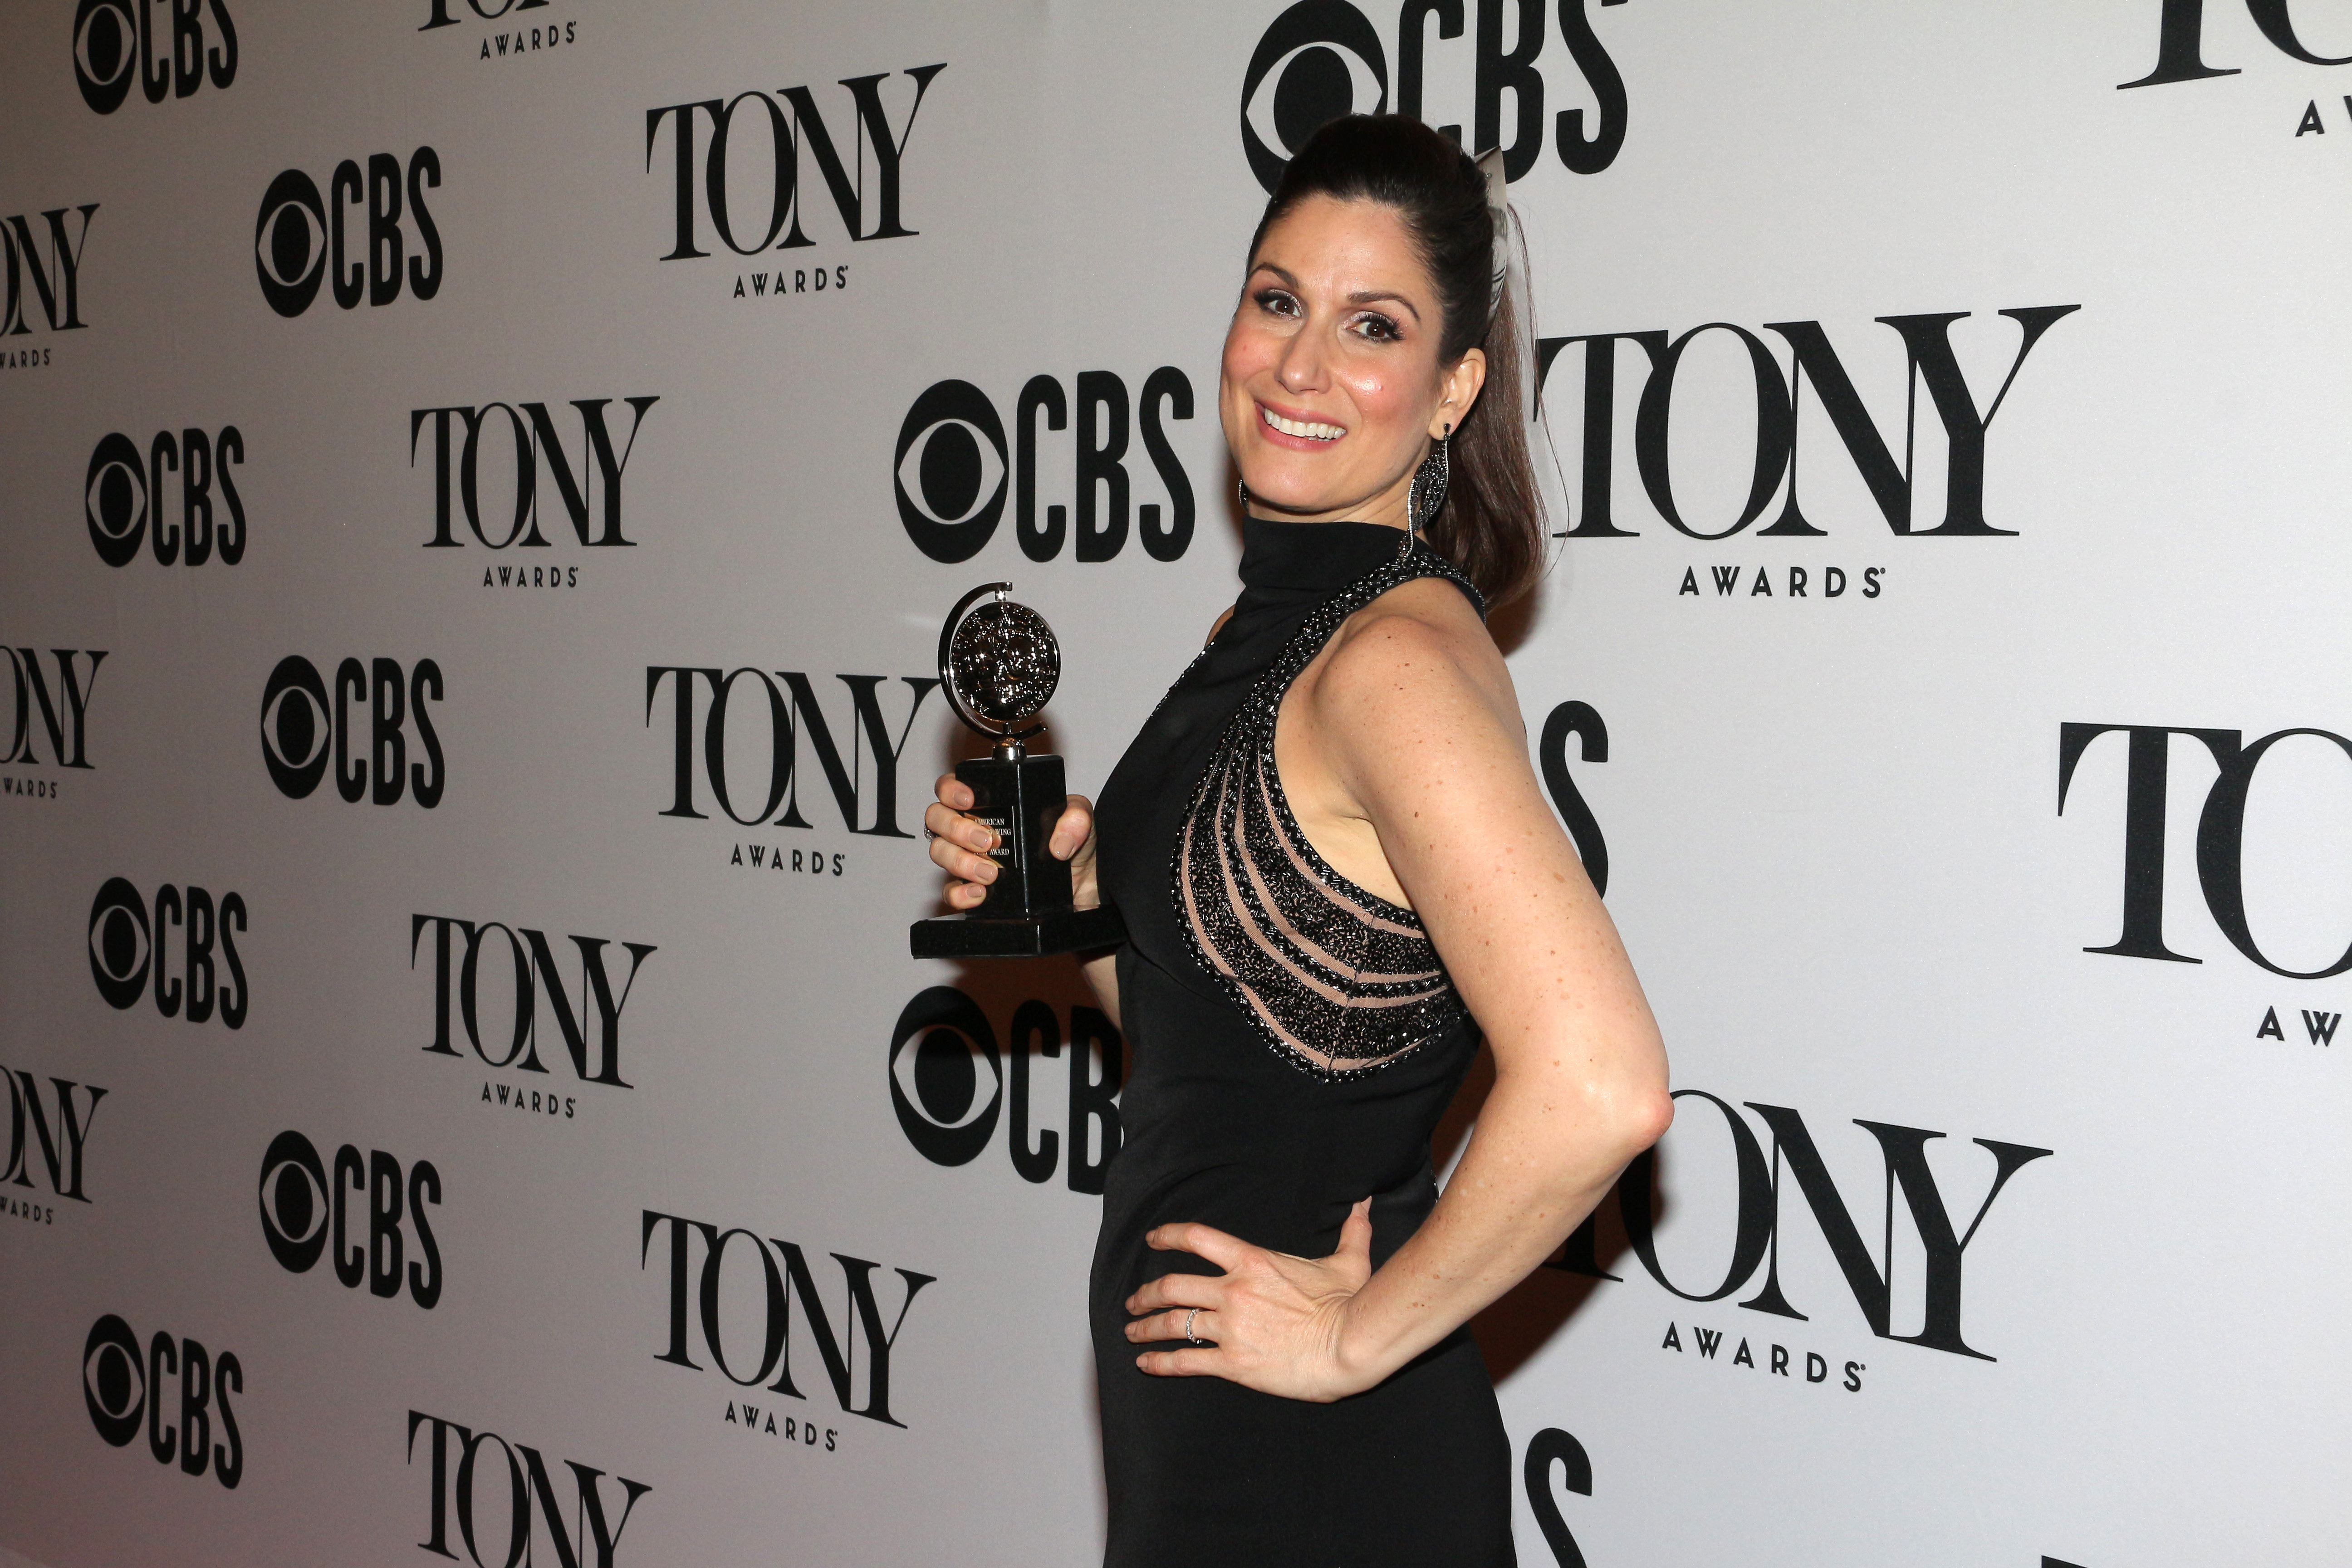 Stephanie J Block, one of the nominees